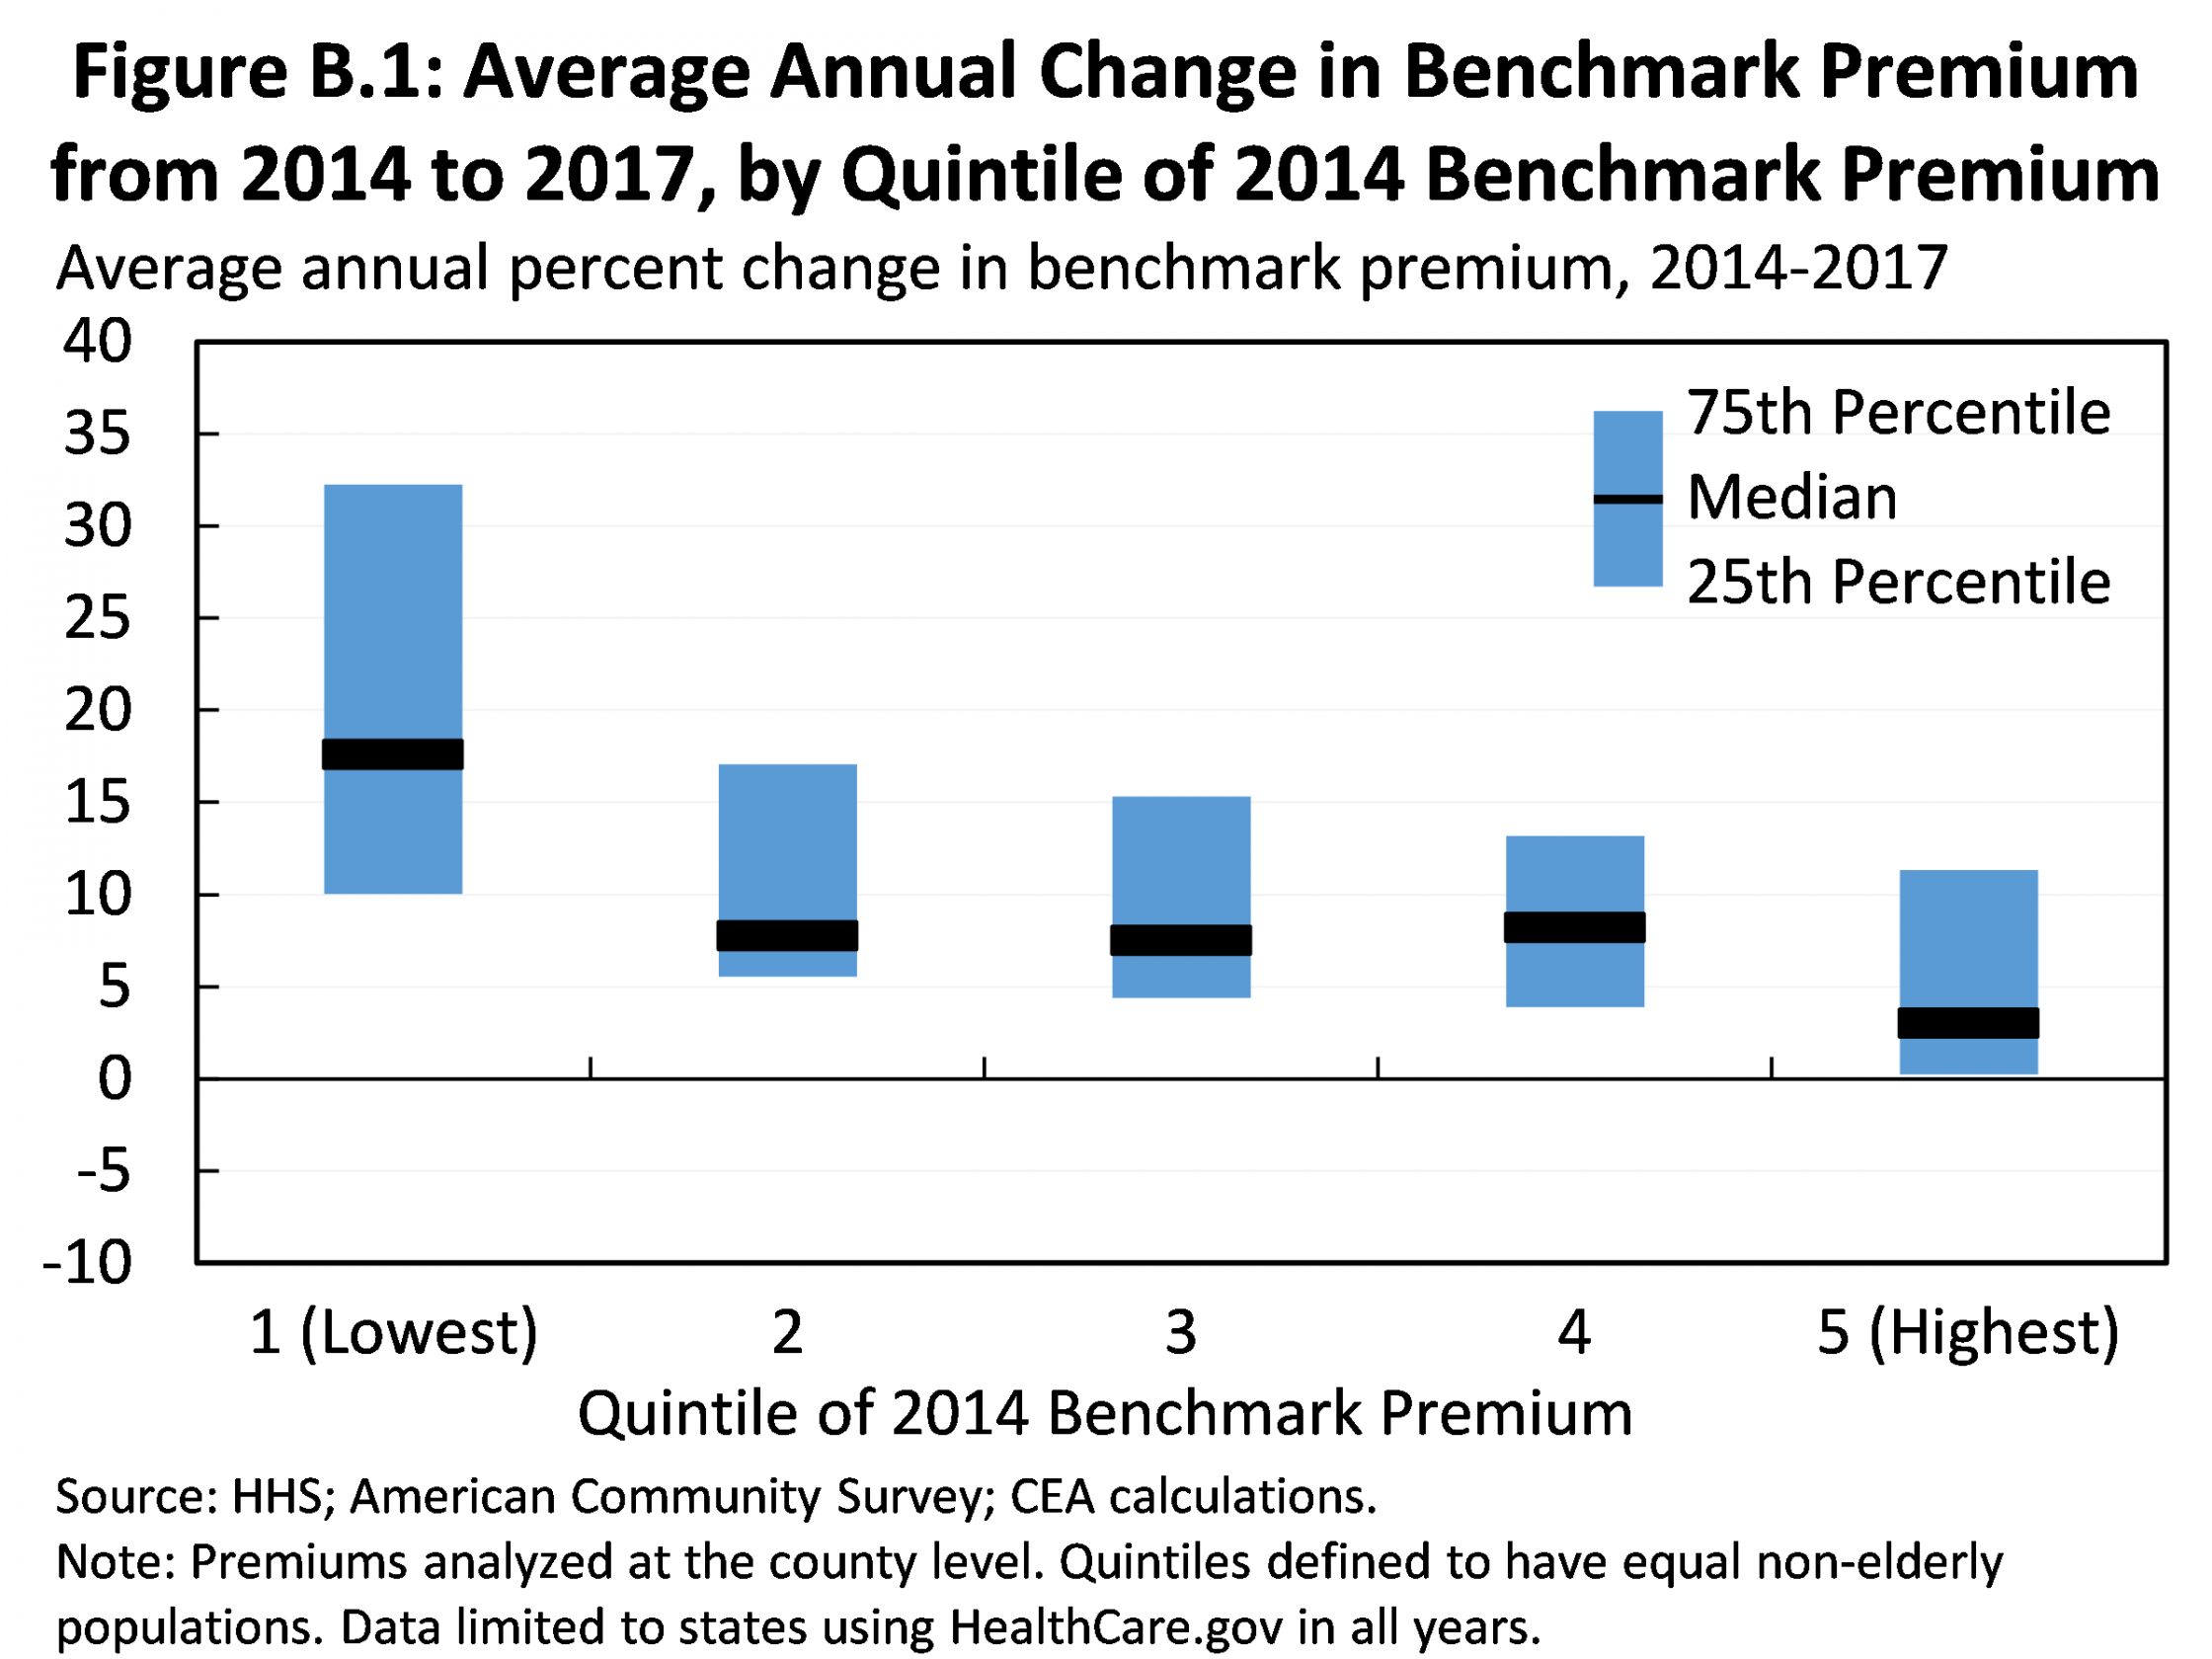 Annual Change in Benchmark Premium from 2014 to 2017, by Quintile of 2014 Benchmark Premium 